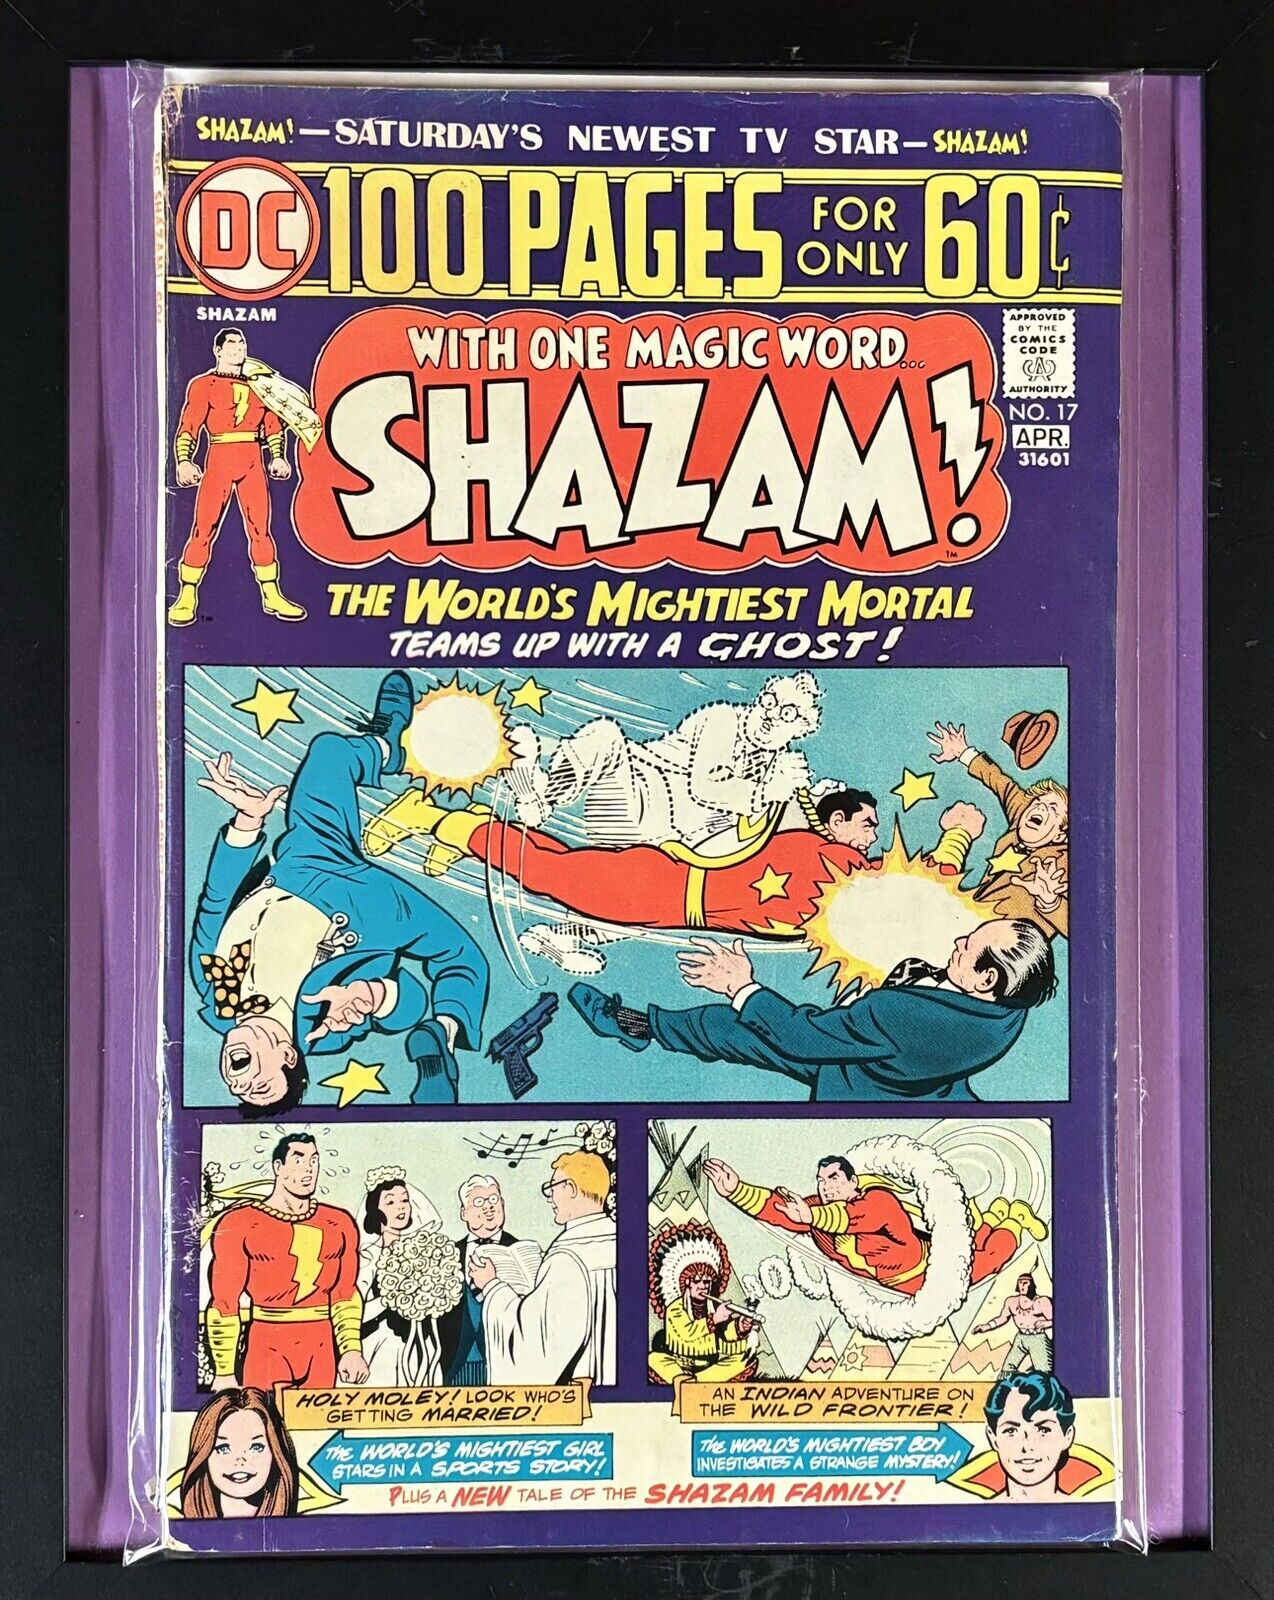 SHAZAM # 17 * 100 PAGES * DC COMICS * 1975. Complete In VG condition